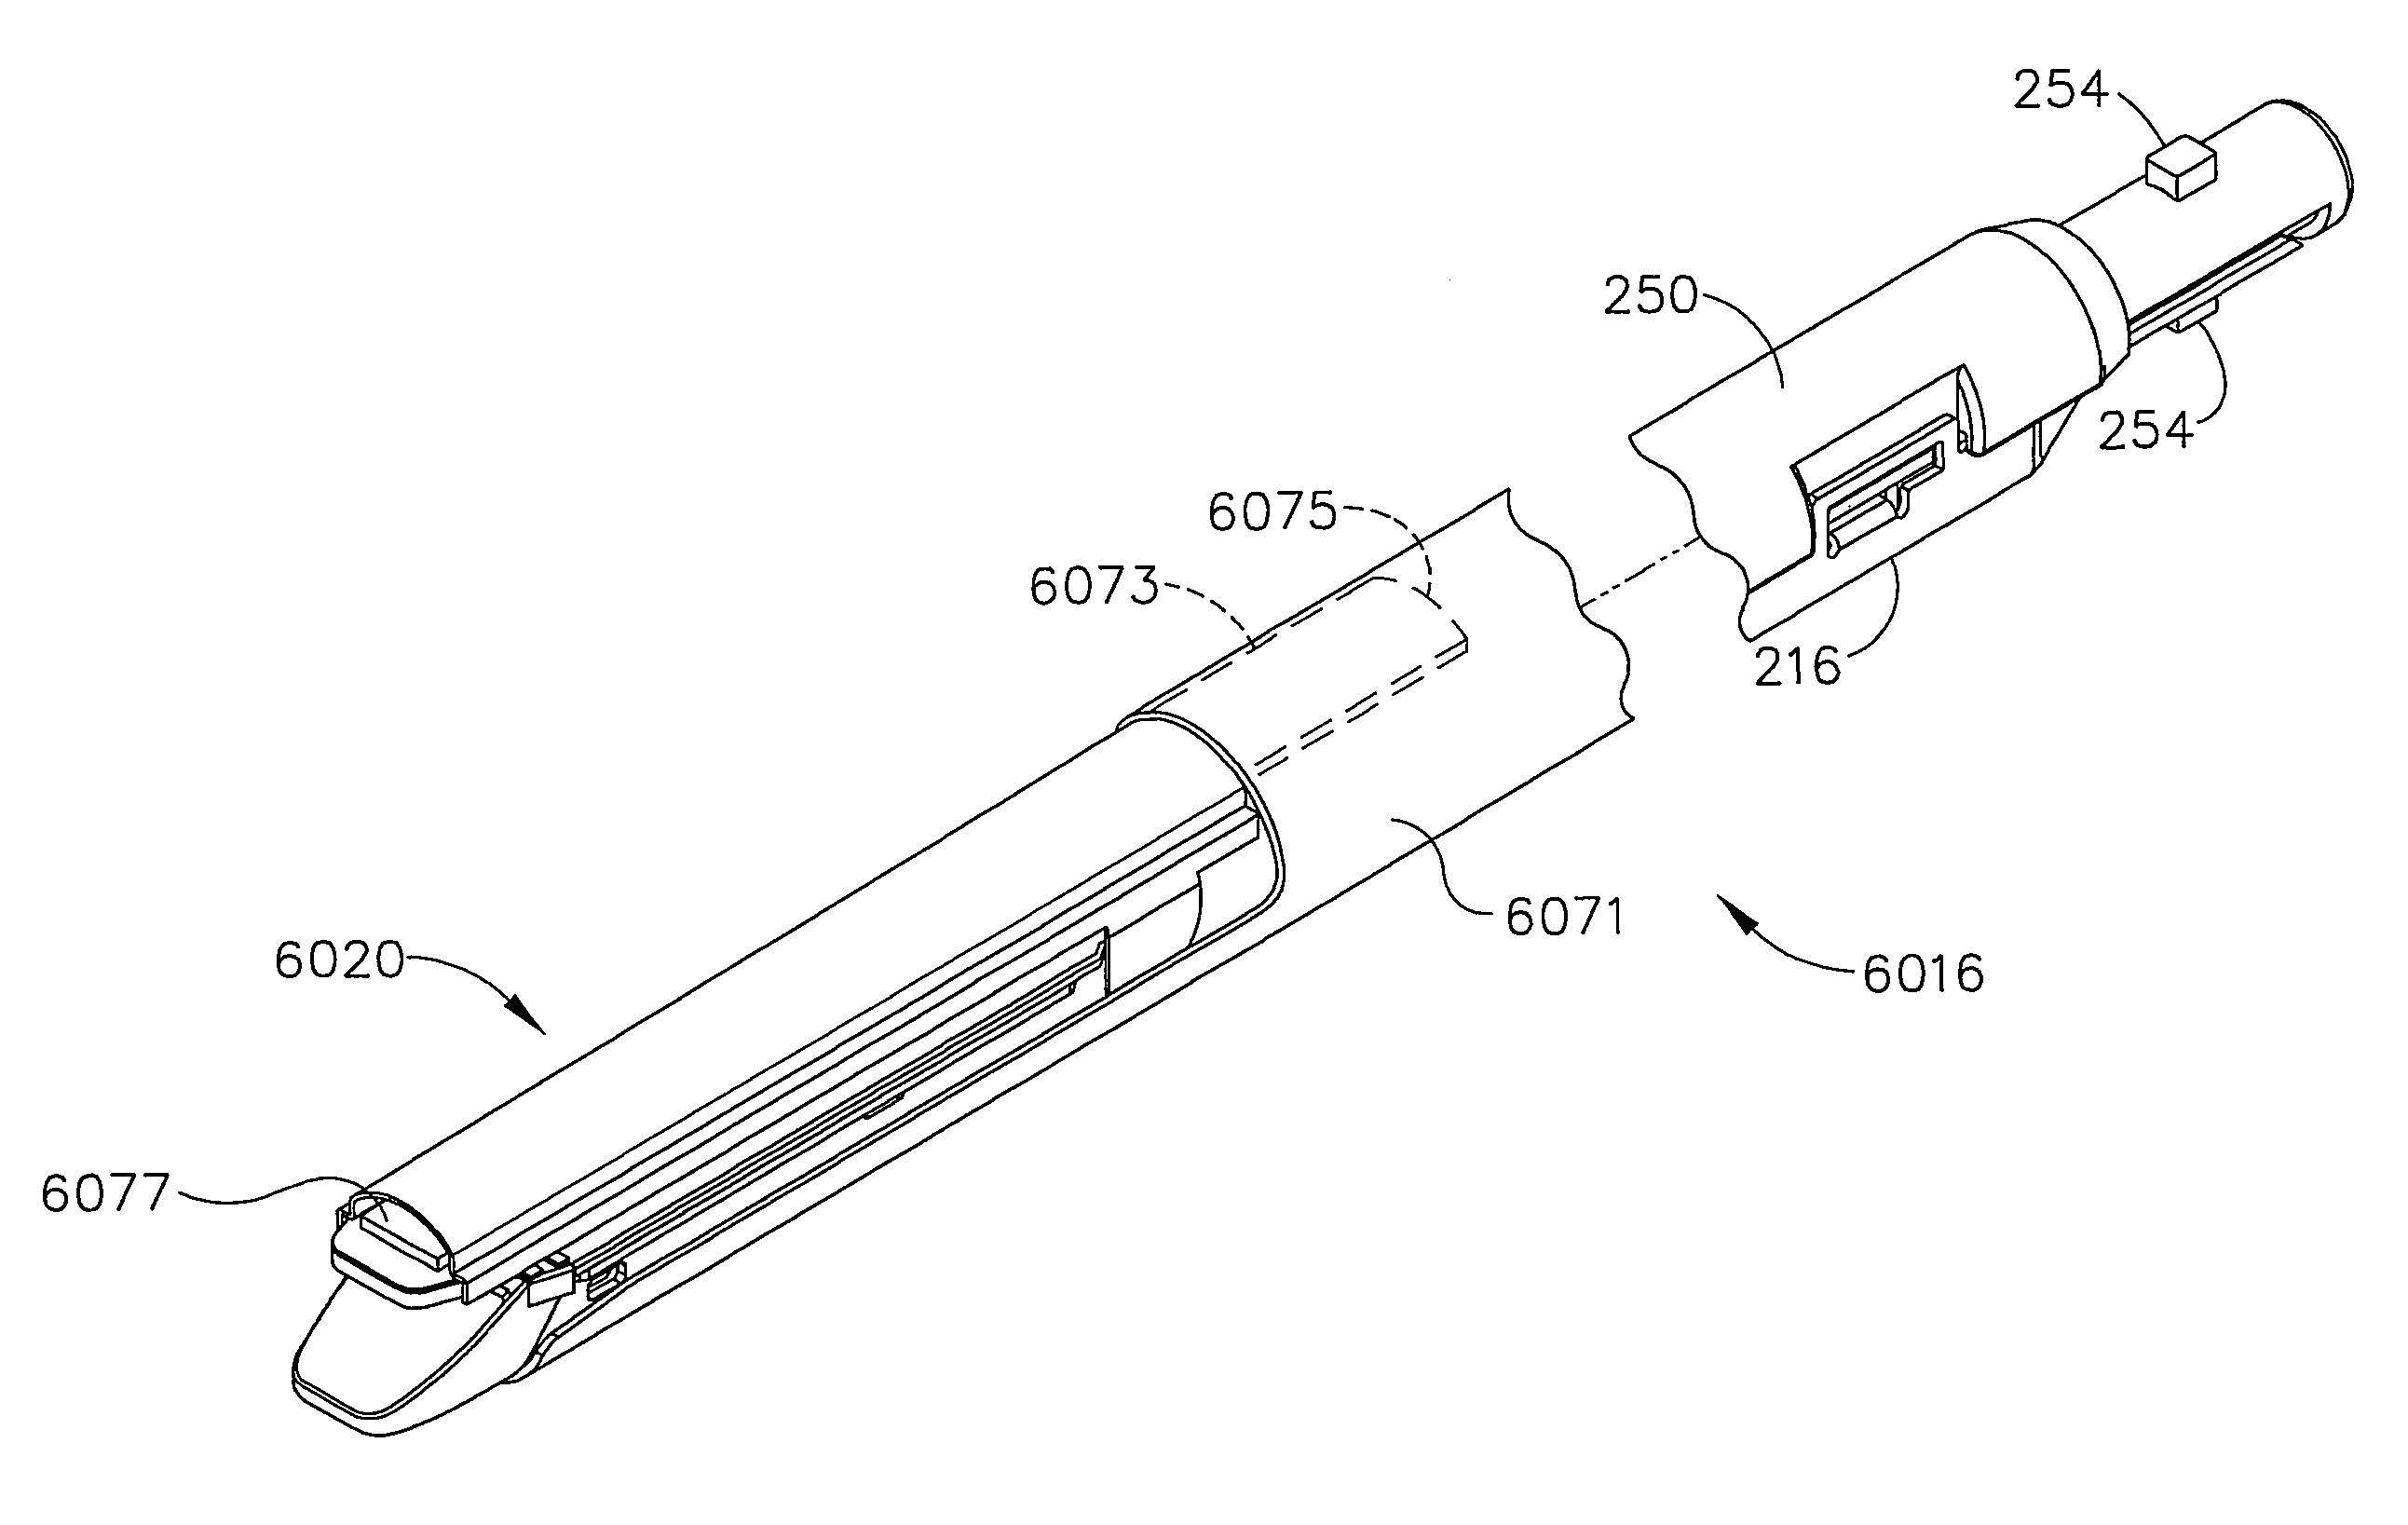 End effectors for a surgical cutting and stapling instrument